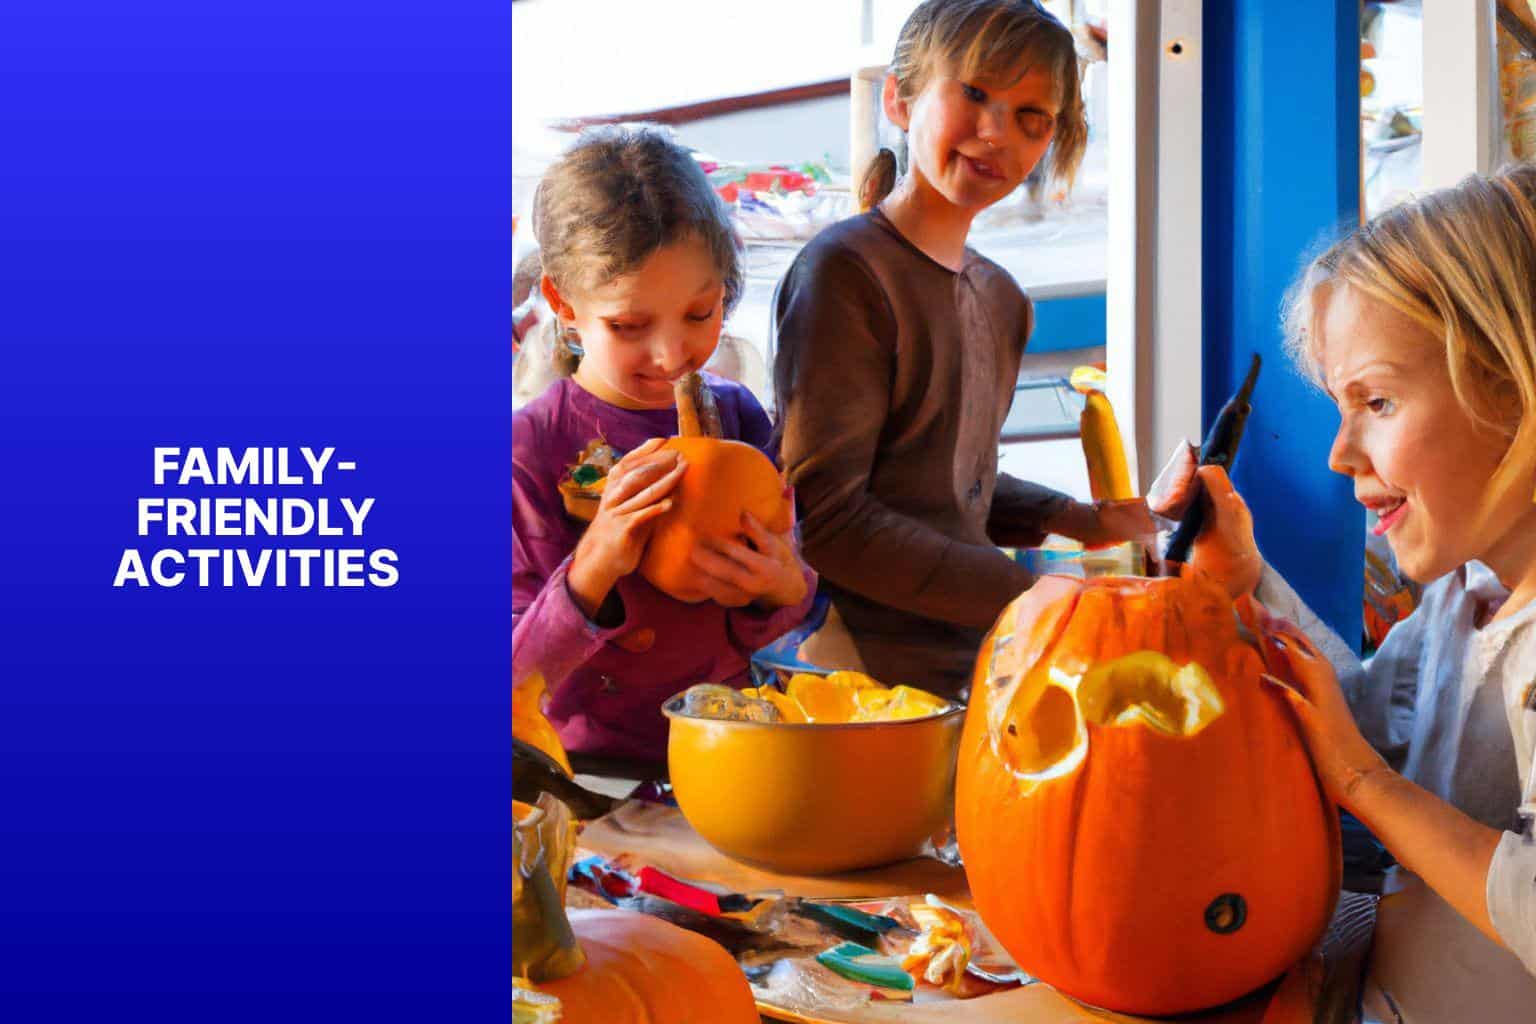 Family-Friendly Activities - what to do instead of halloween 